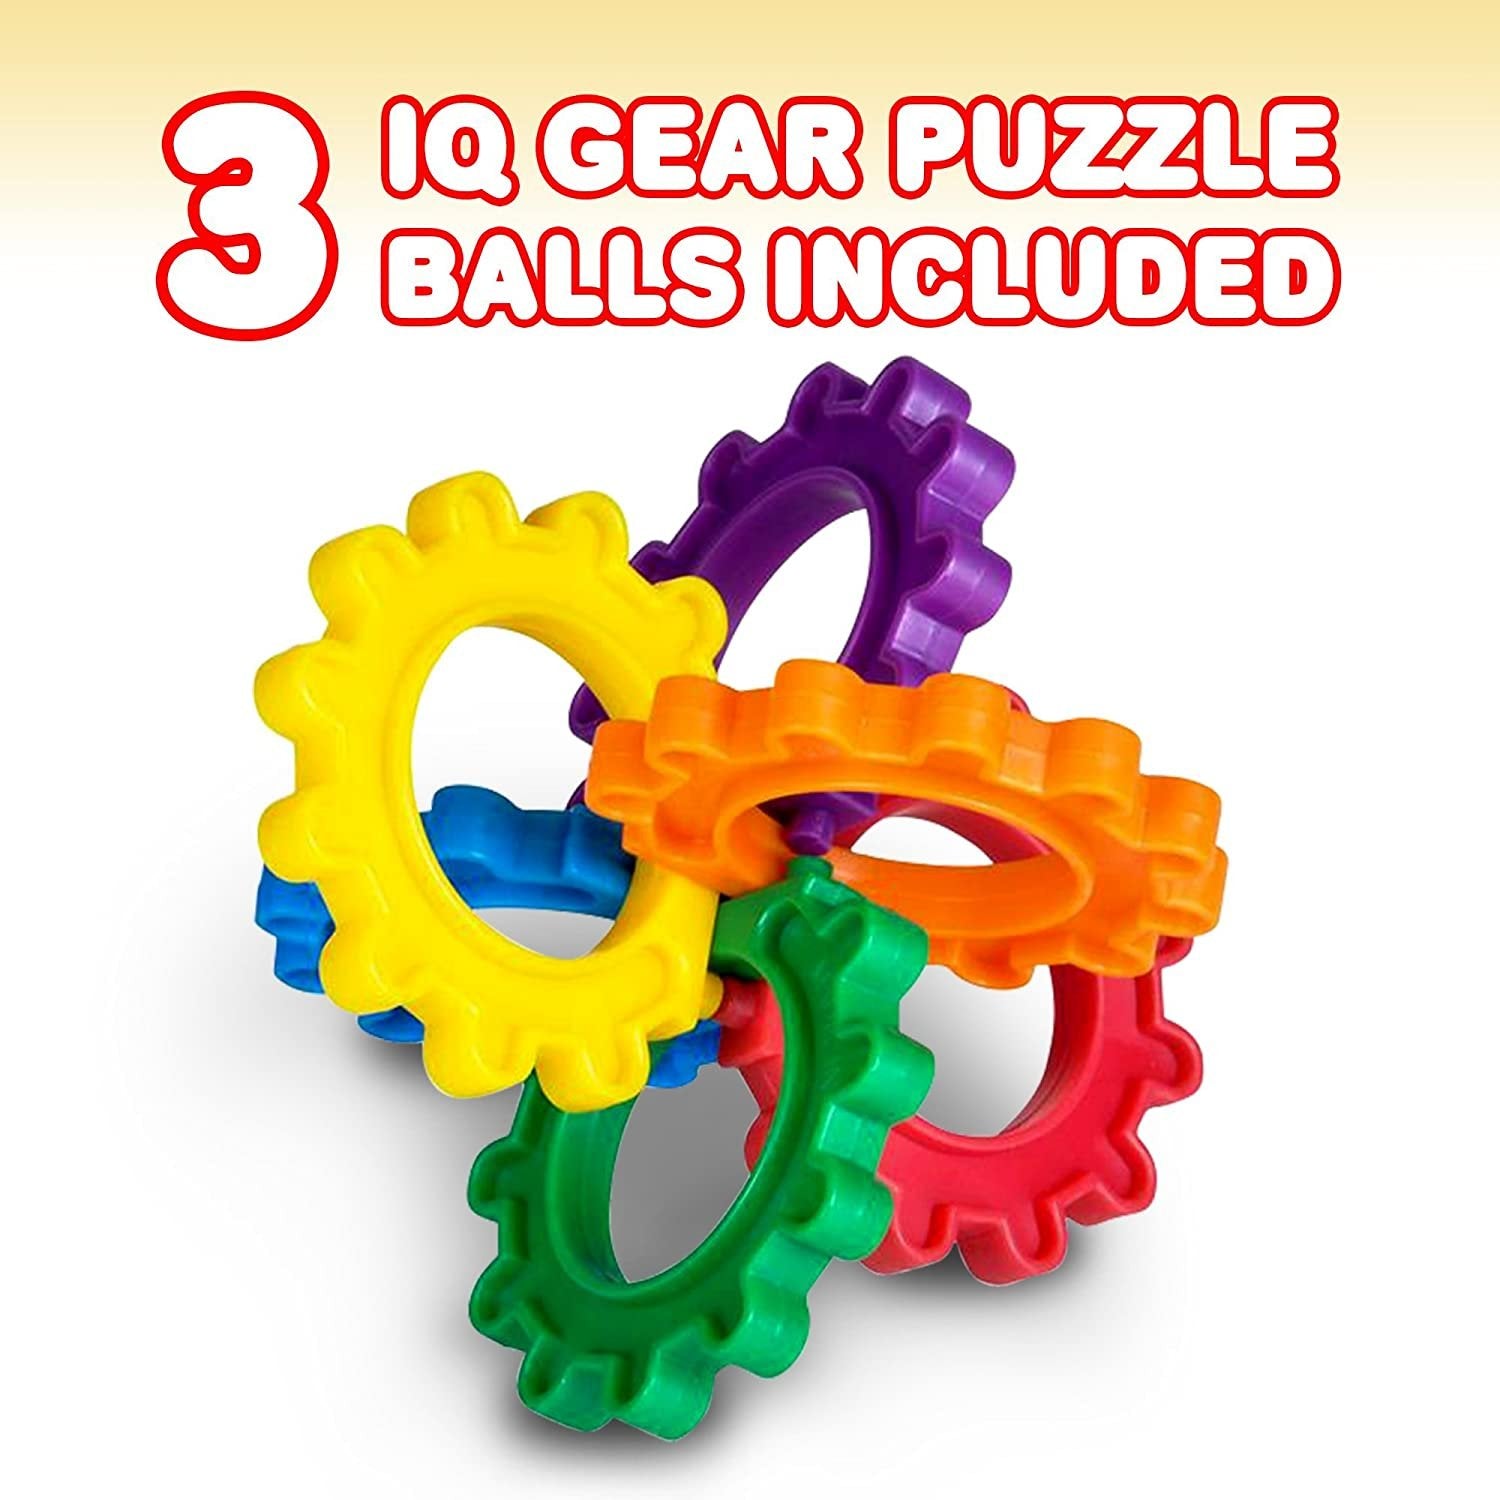 Fun Puzzle Balls with Free Colorful Instruction Guide by Gamie - Party Games - Fidget Brain Teaser Puzzles - Includes 12 Fun and Challenging Puzzle Balls - Great Educational Toy for Kids